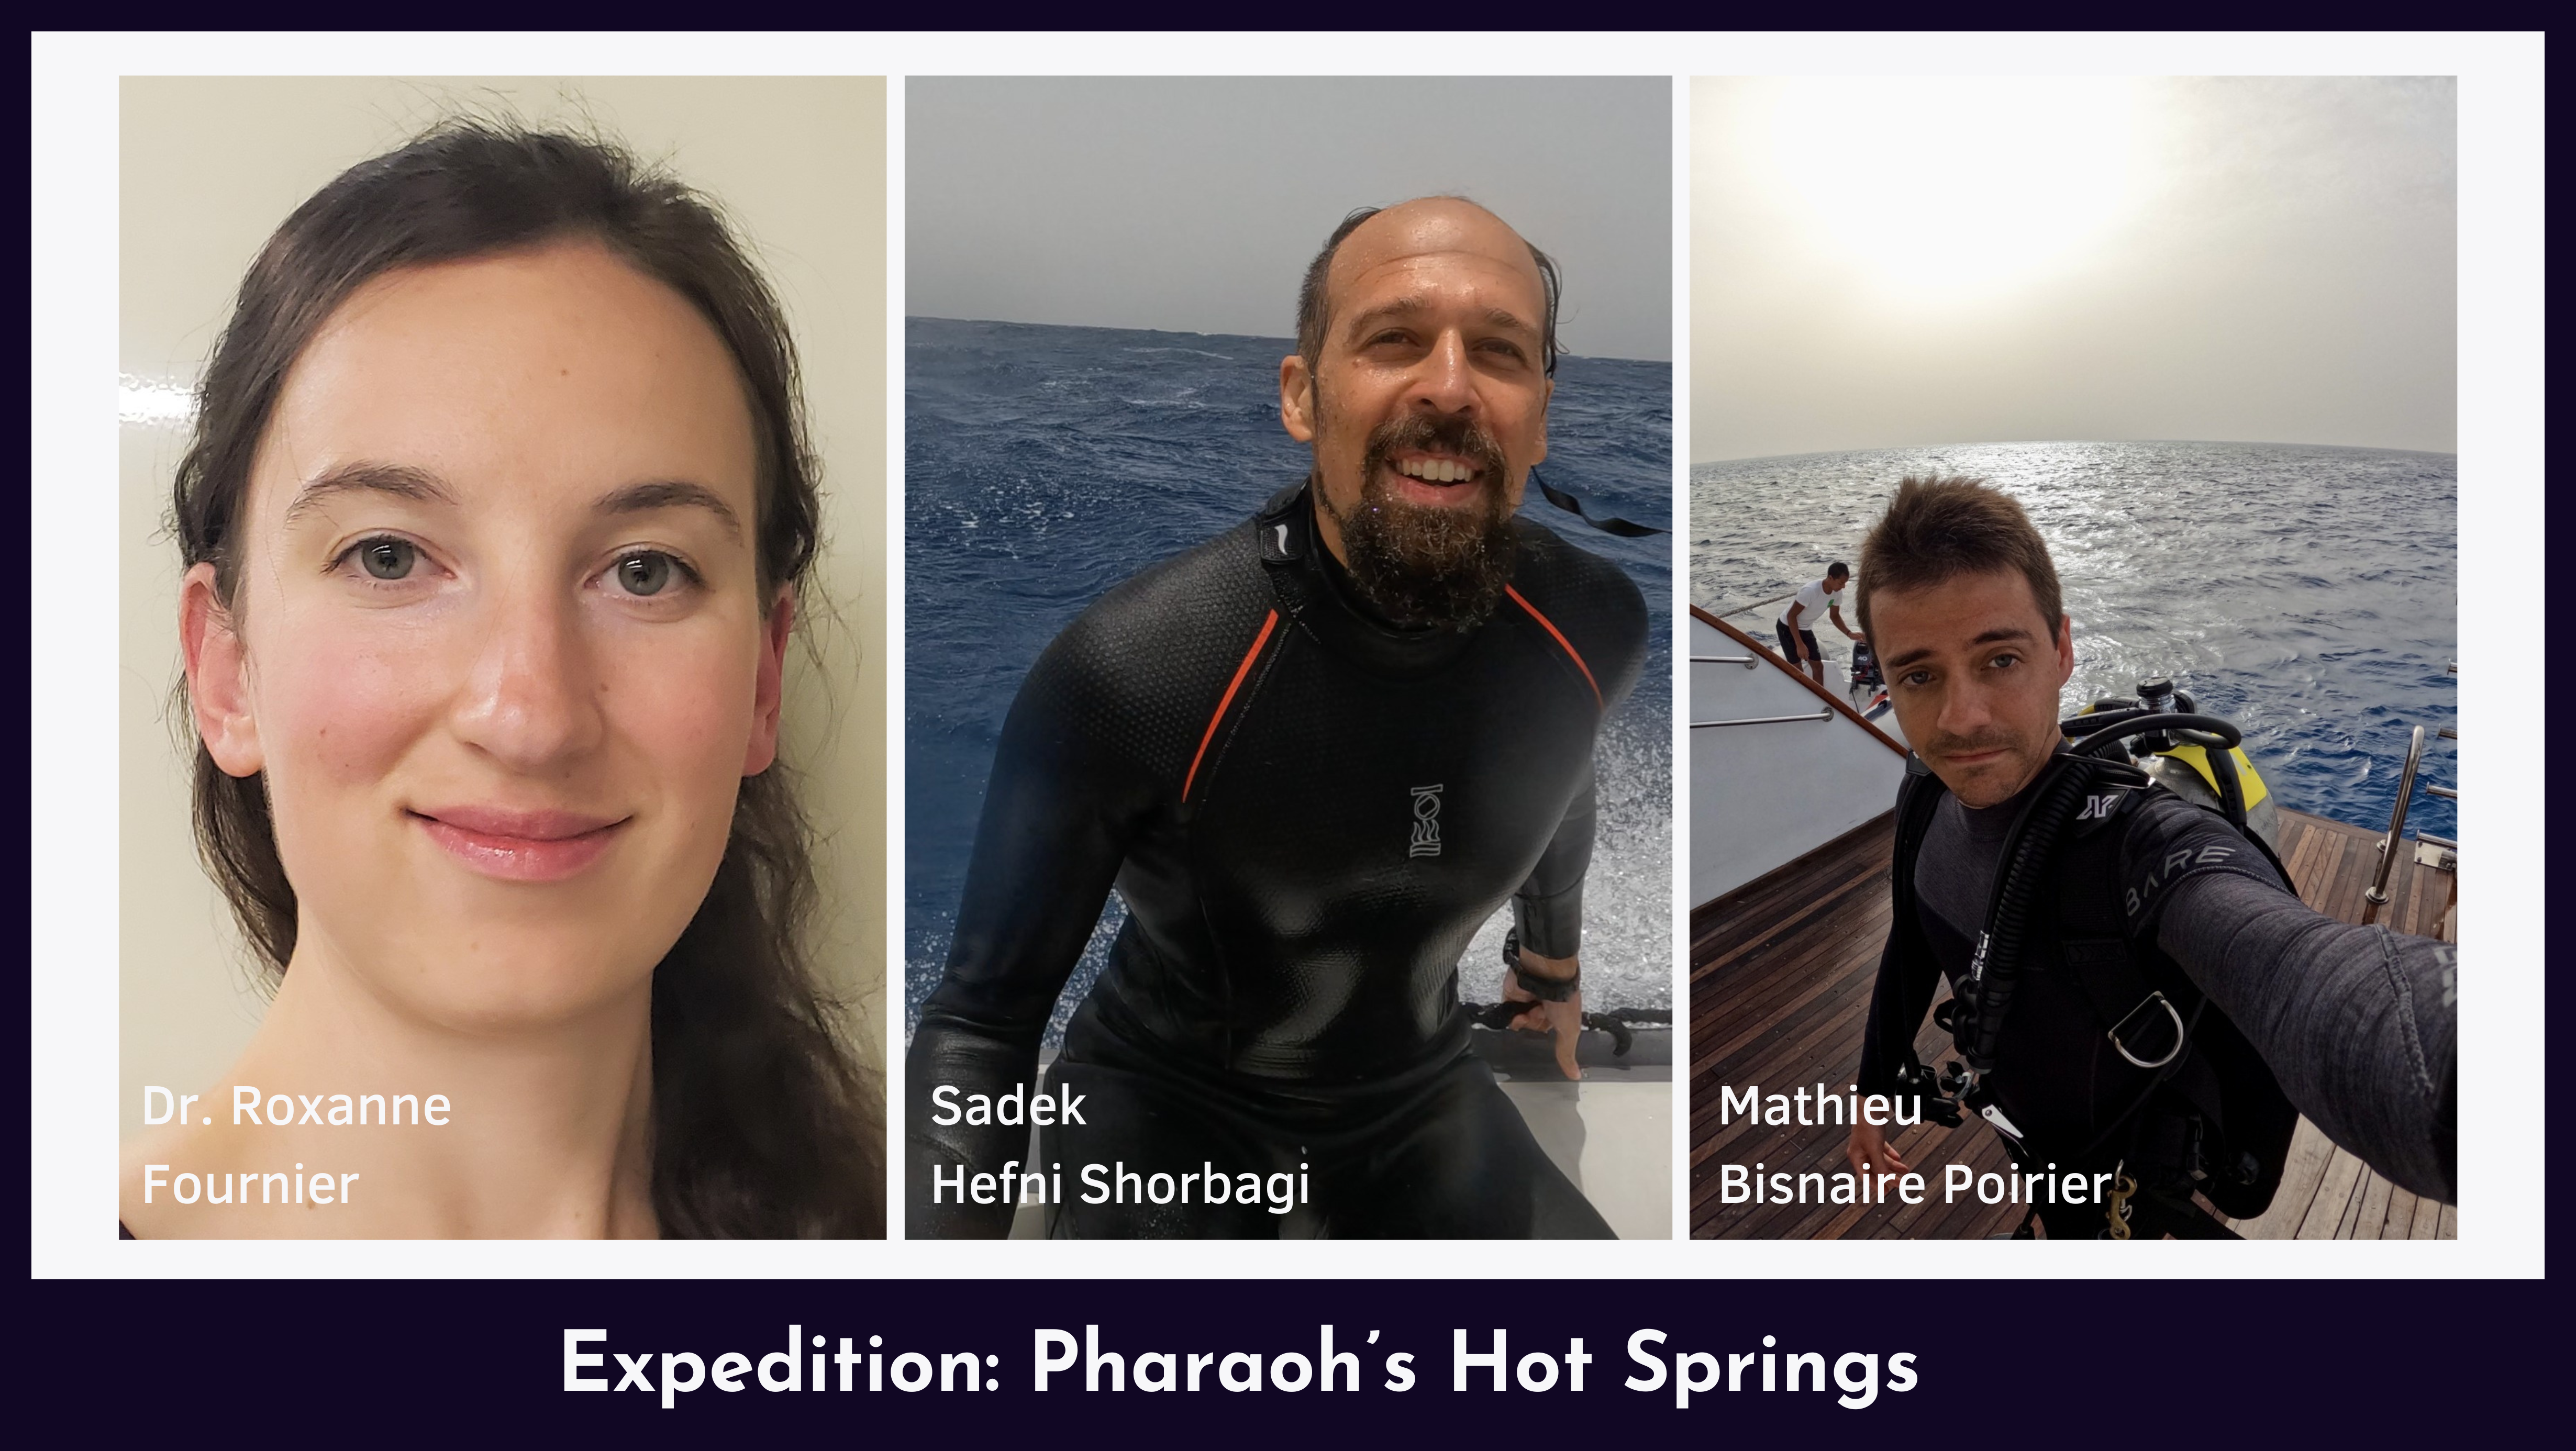 Headshots of three prospective expeditioners for “Pharaoh’s Hot Springs” project